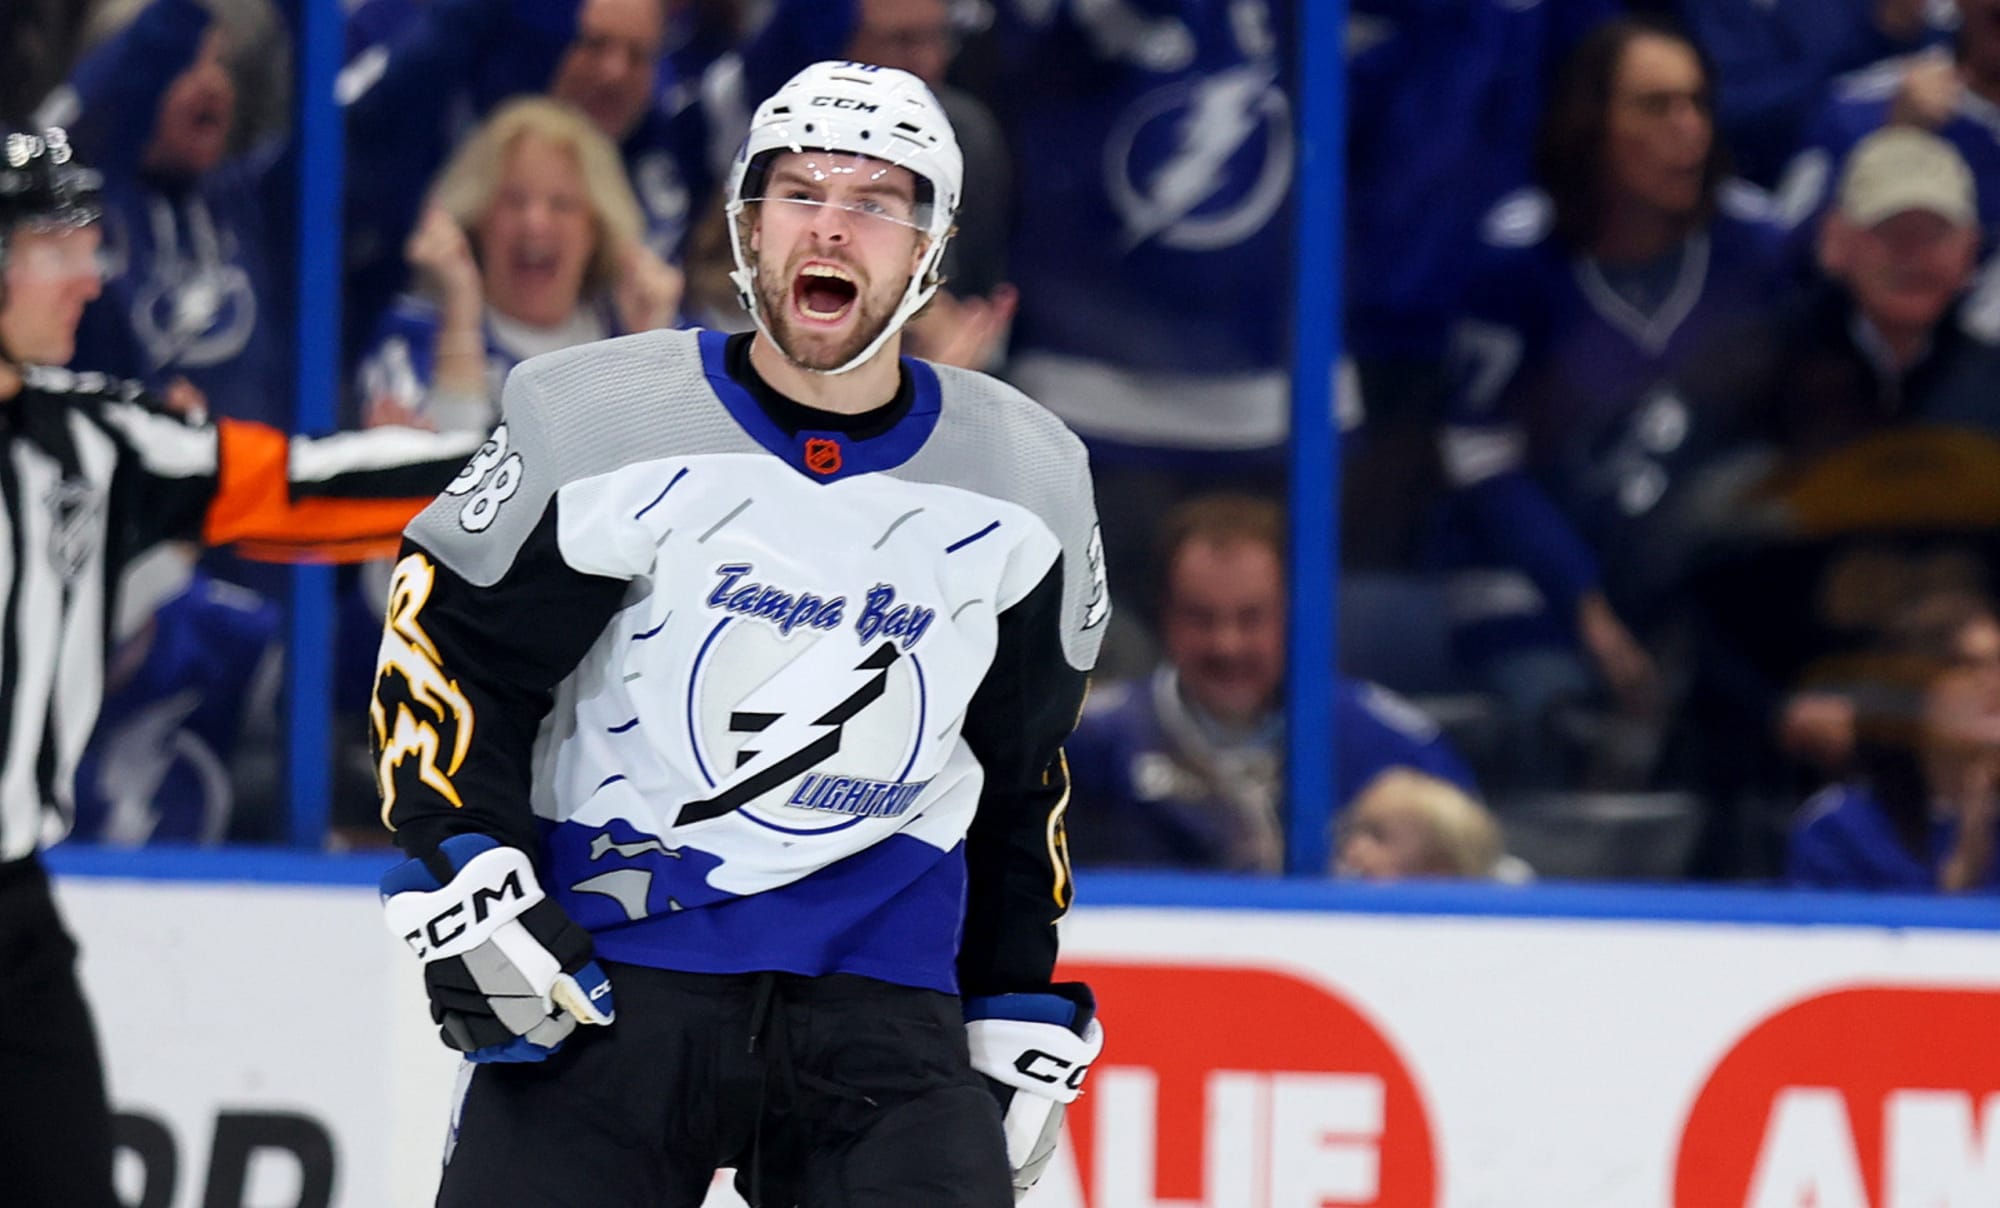 Lightning sign Hagel to an 8-year, $52 million extension